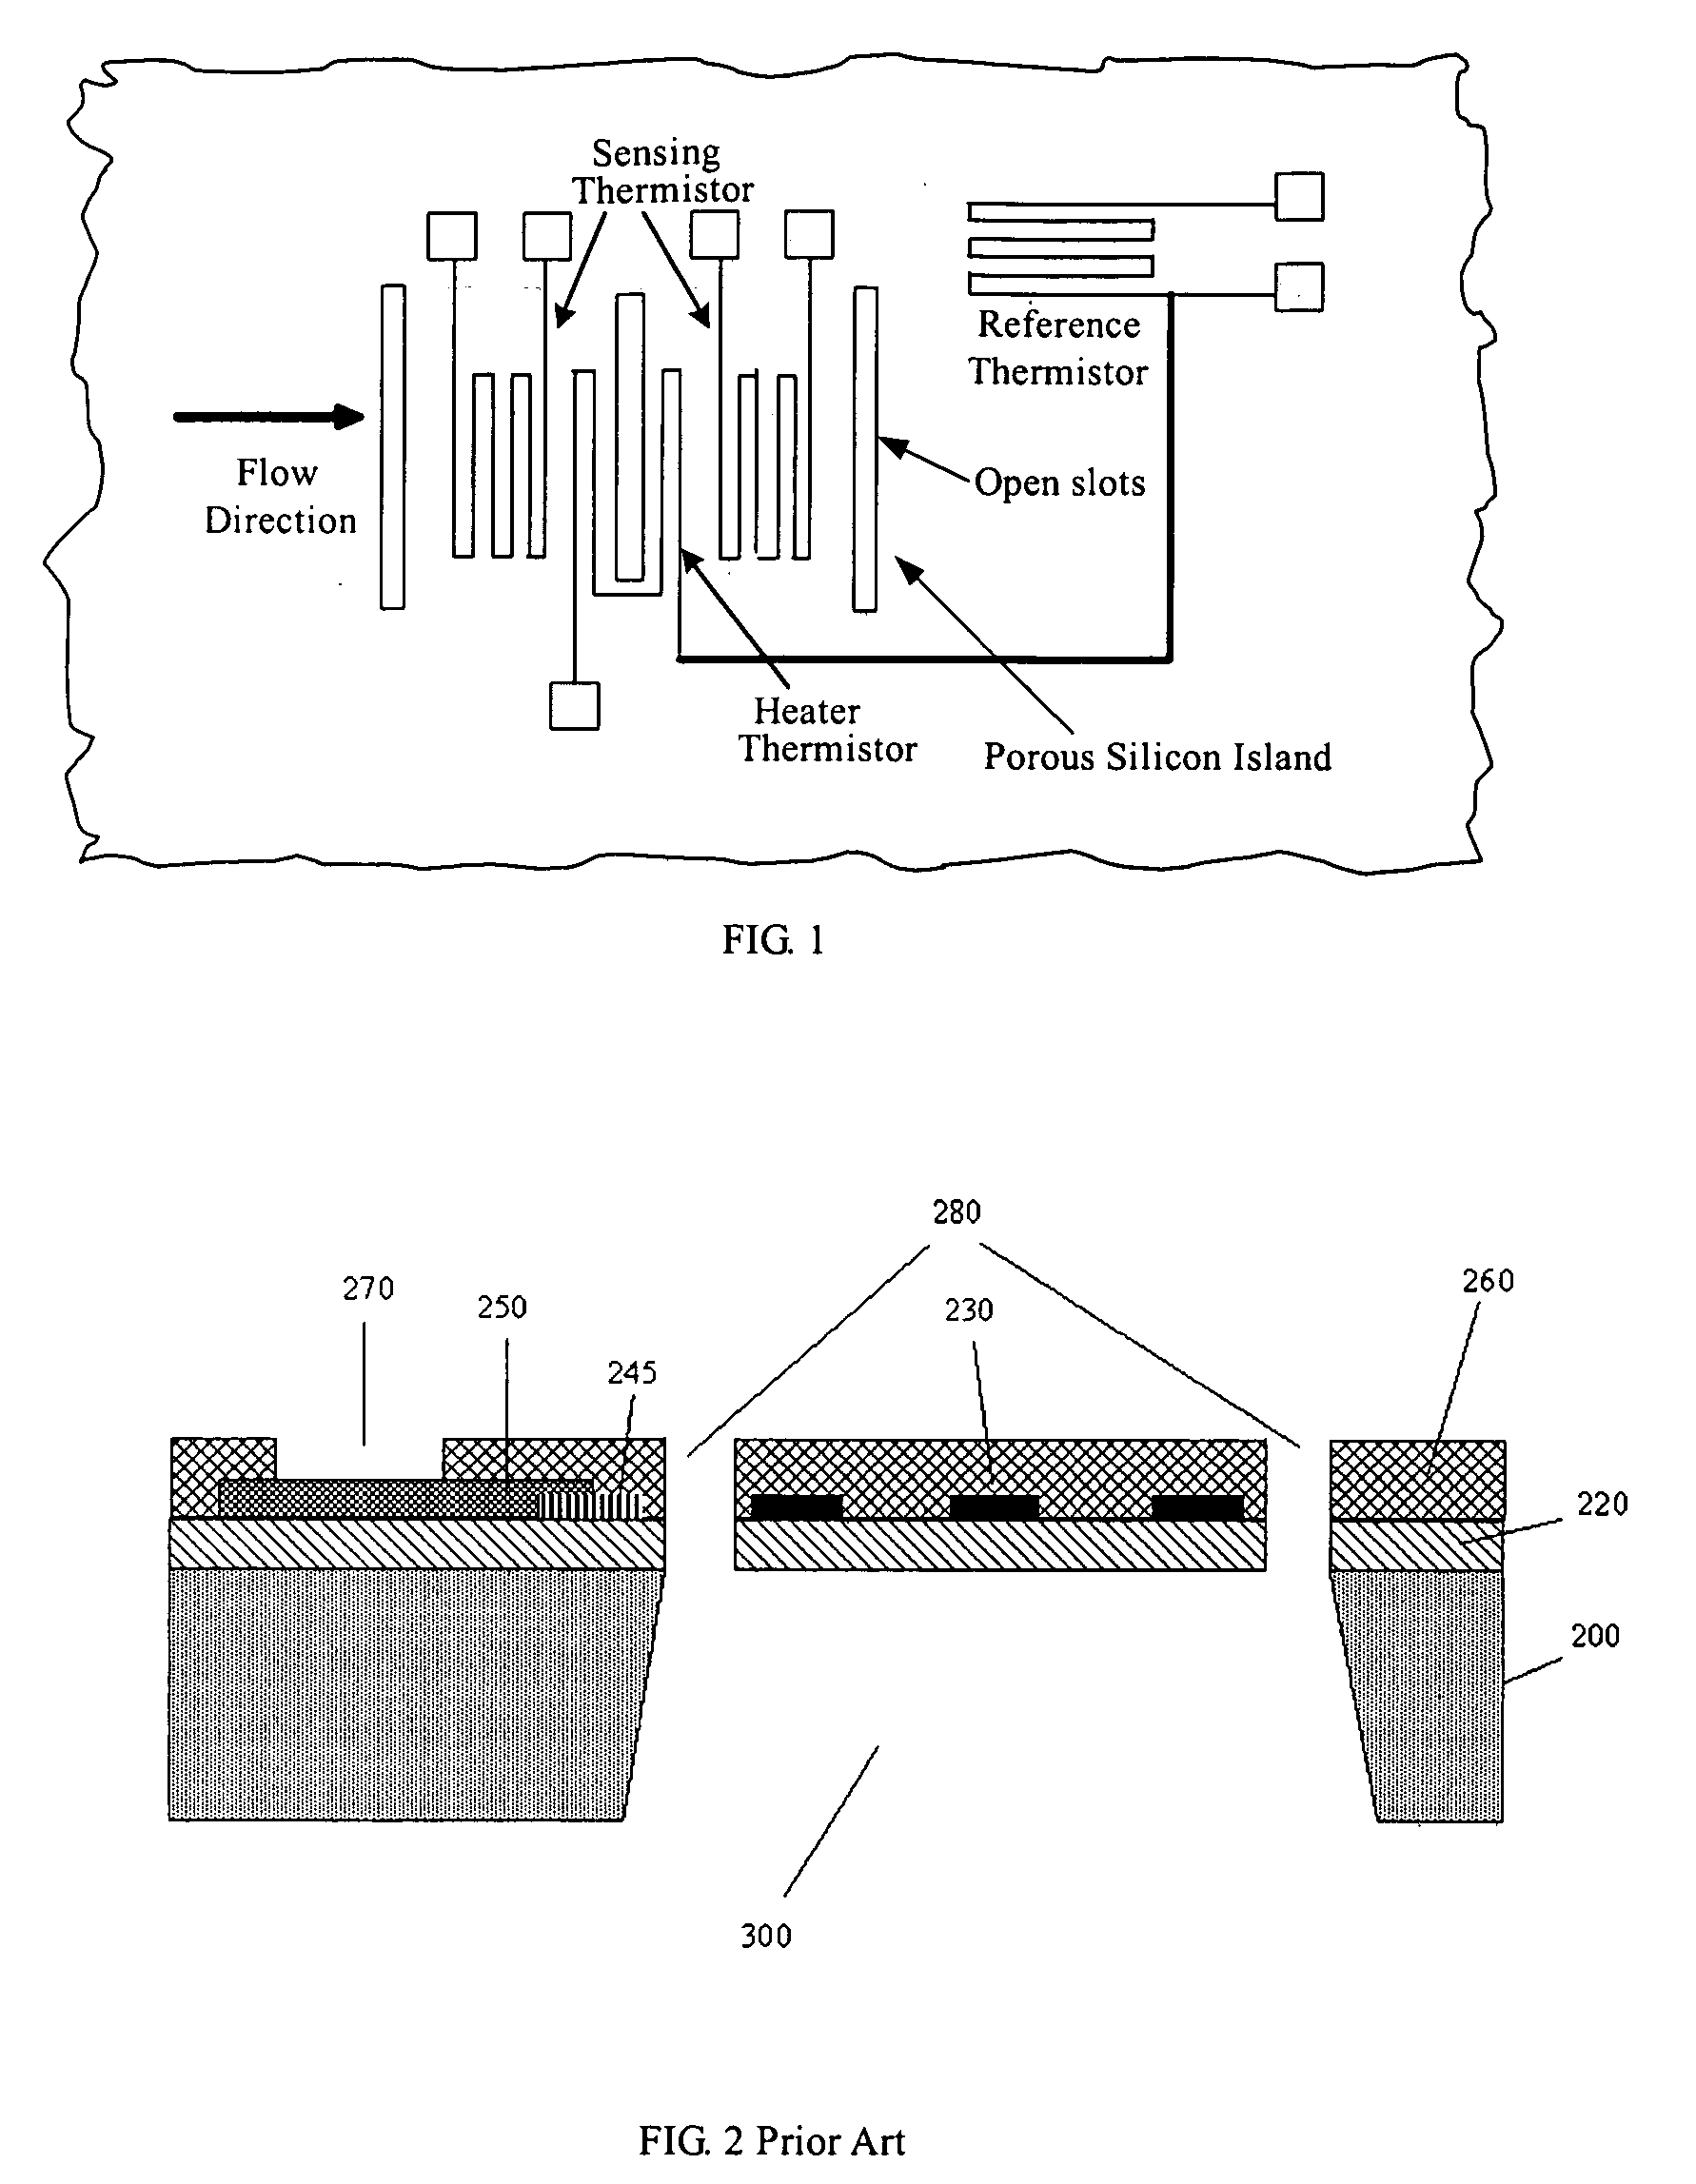 Micromachined Thermal Mass Flow Sensor With Self-Cleaning Capability And Methods Of Making the Same